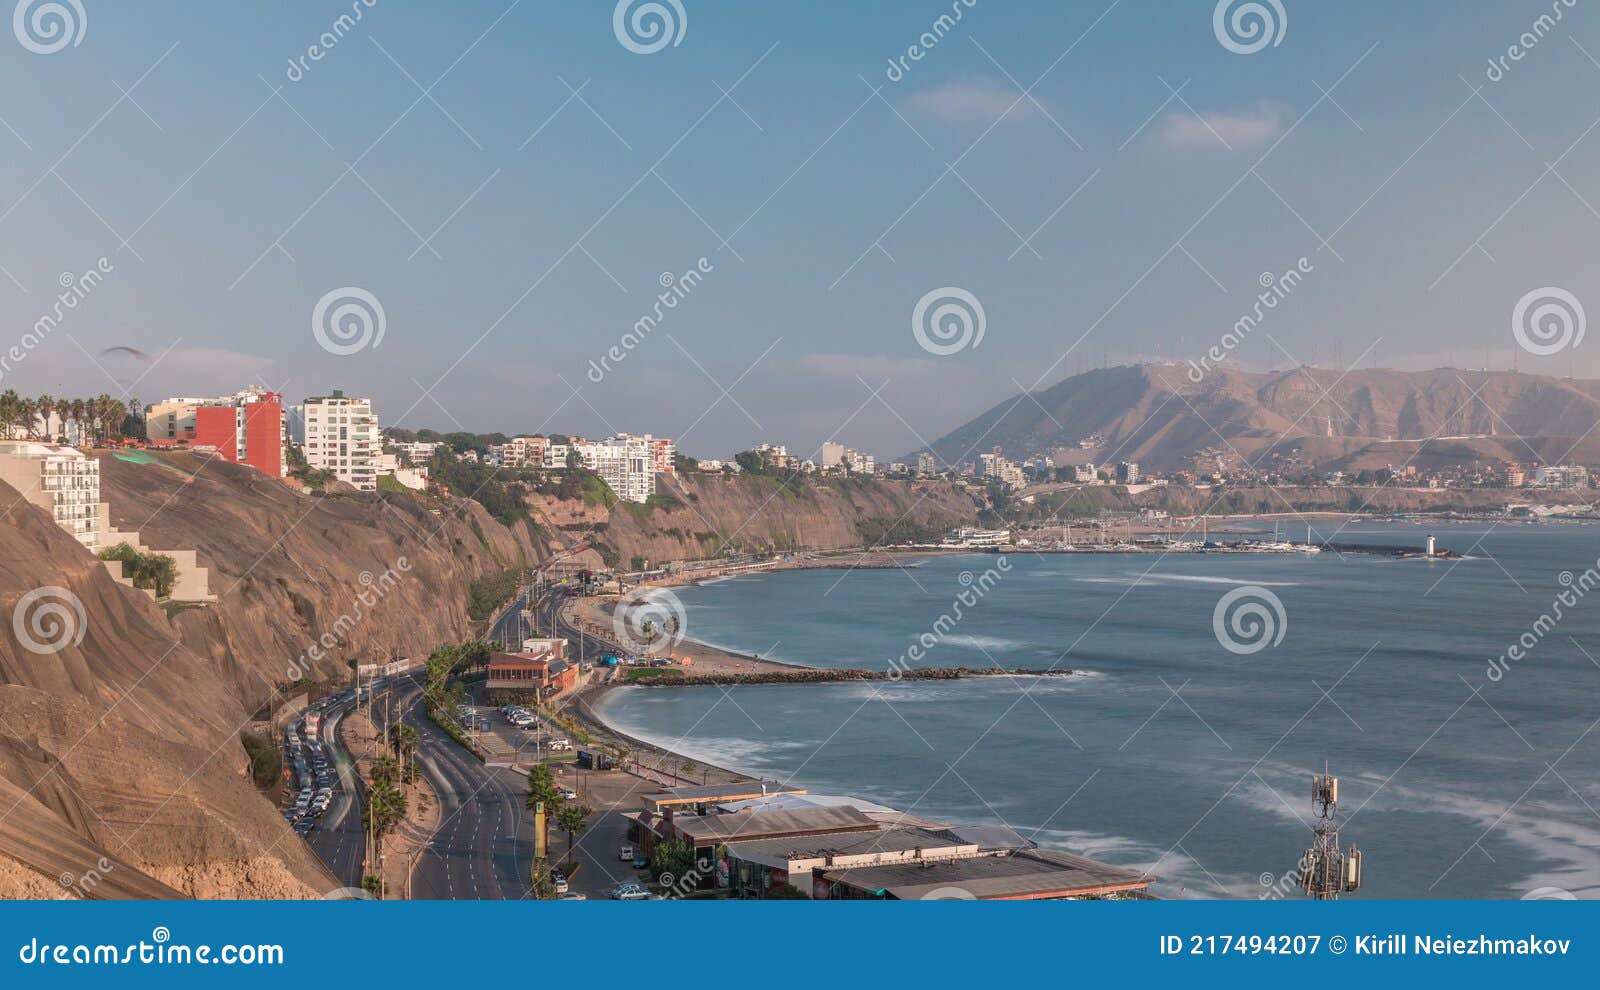 traffic on circuito de playas road in miraflores district of lima aerial timelapse